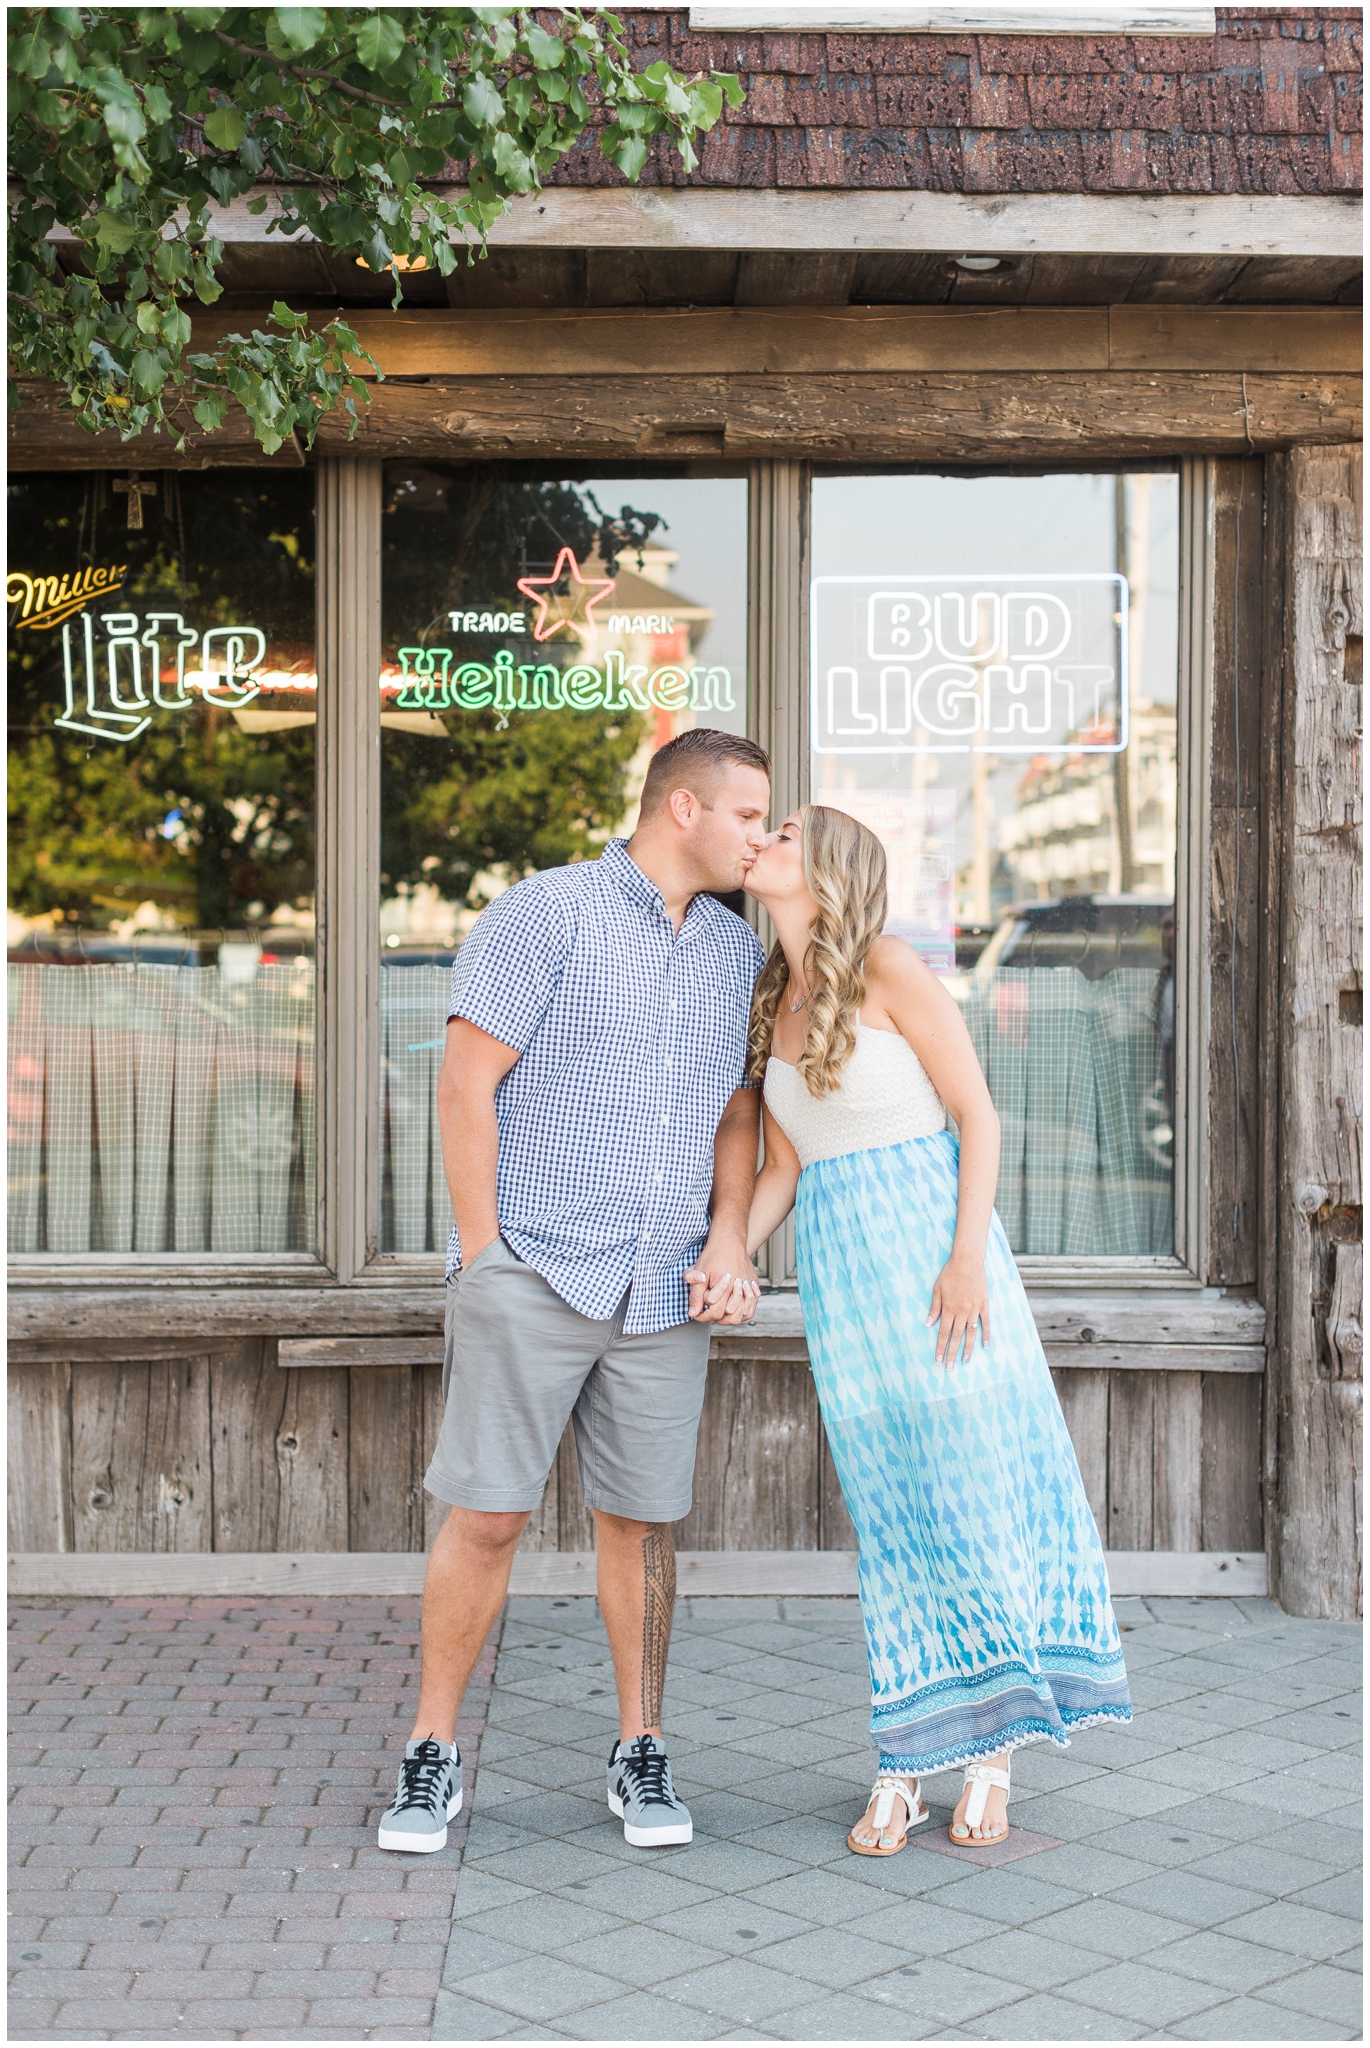 Riggers Bar Engagement Session